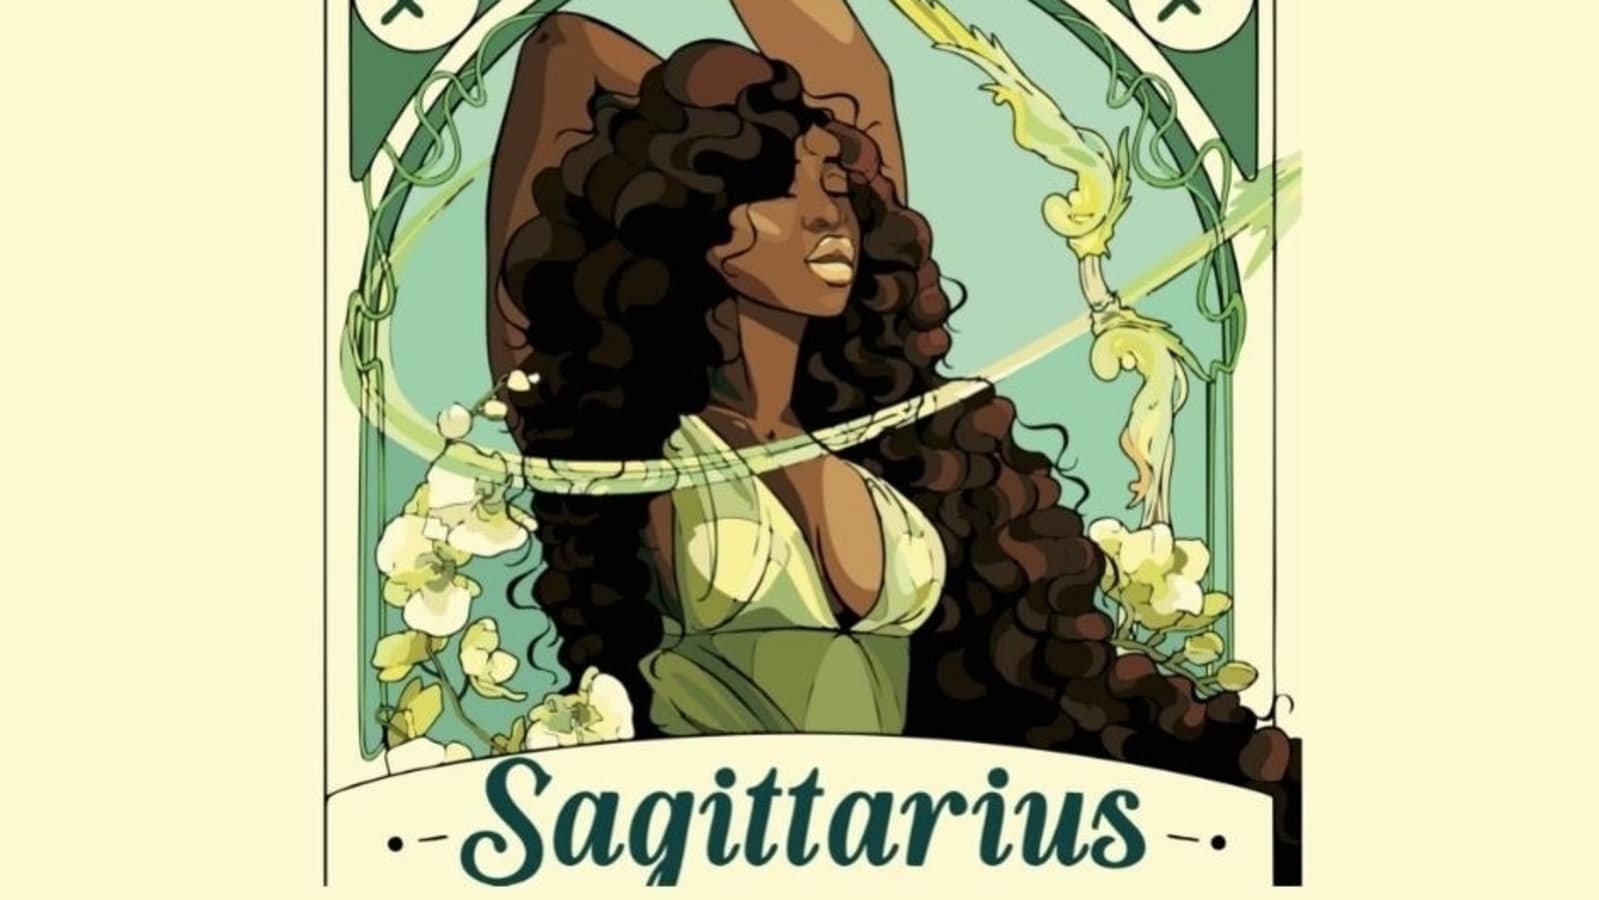 Sagittarius Horoscope Today: Daily predictions for June 27, '22 states, good day